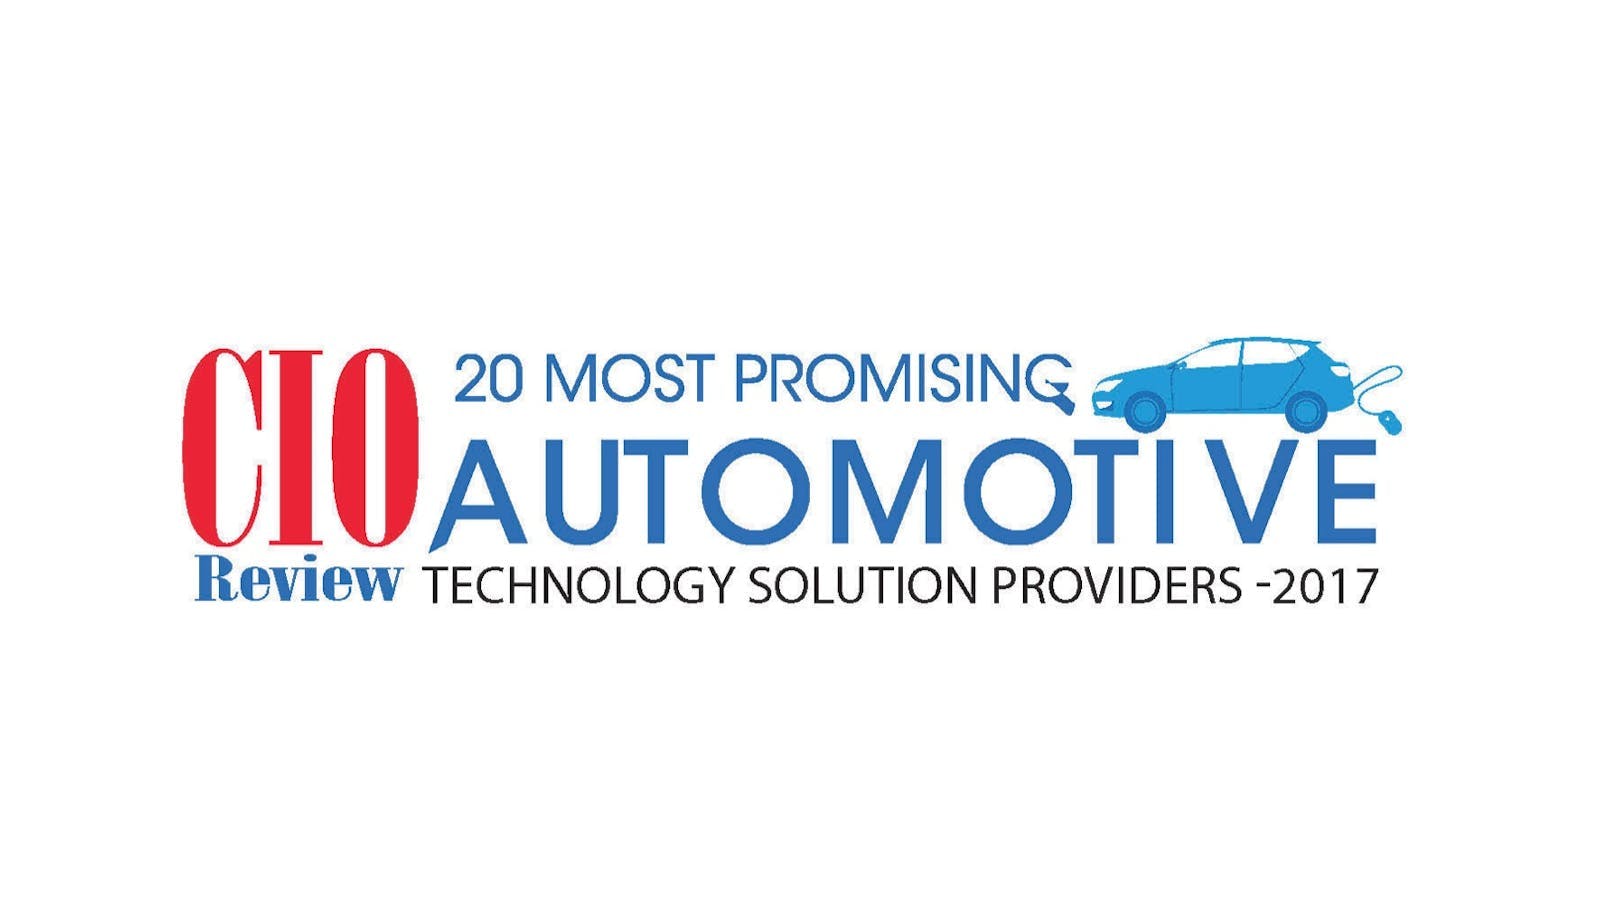 CIO Review, 20 Most Promising Automotive Technology Solution Providers 2017 Logo